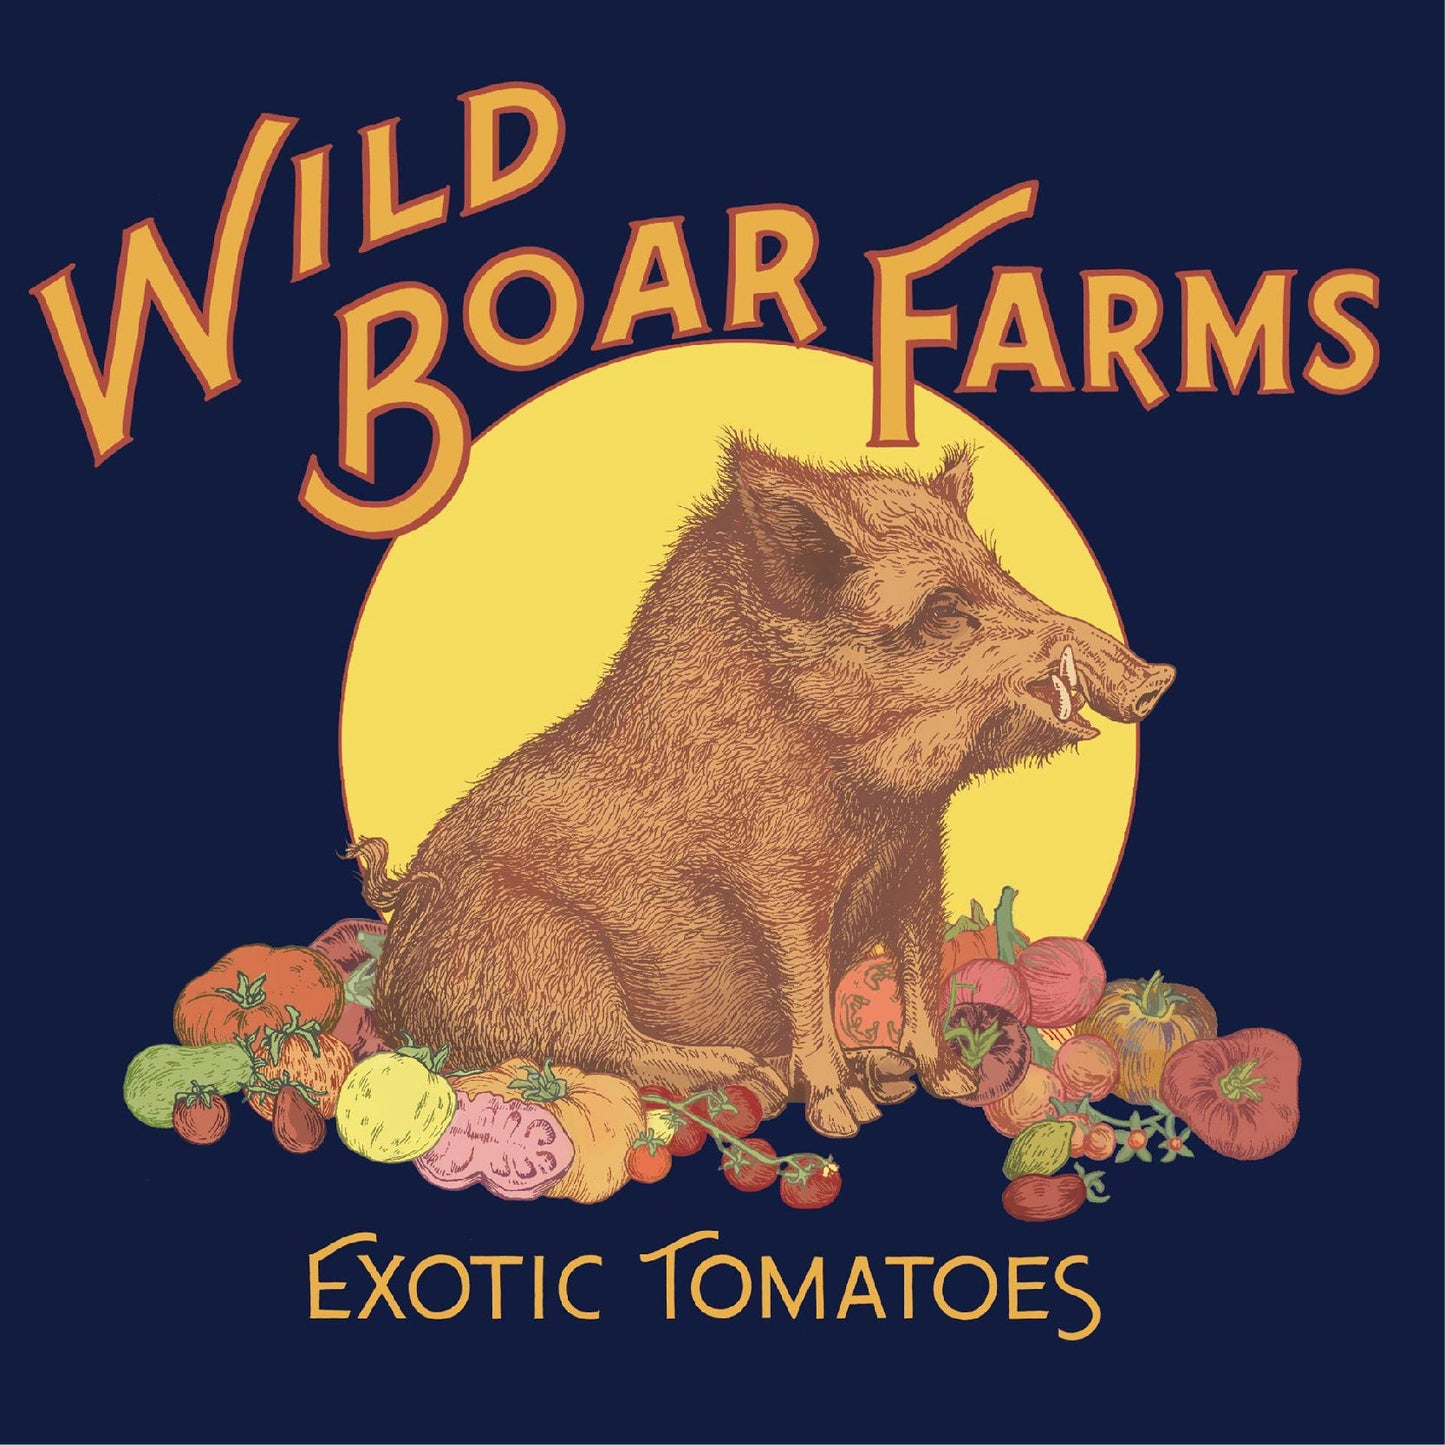 Crushed Heart Tomato By Wild Boar Farms